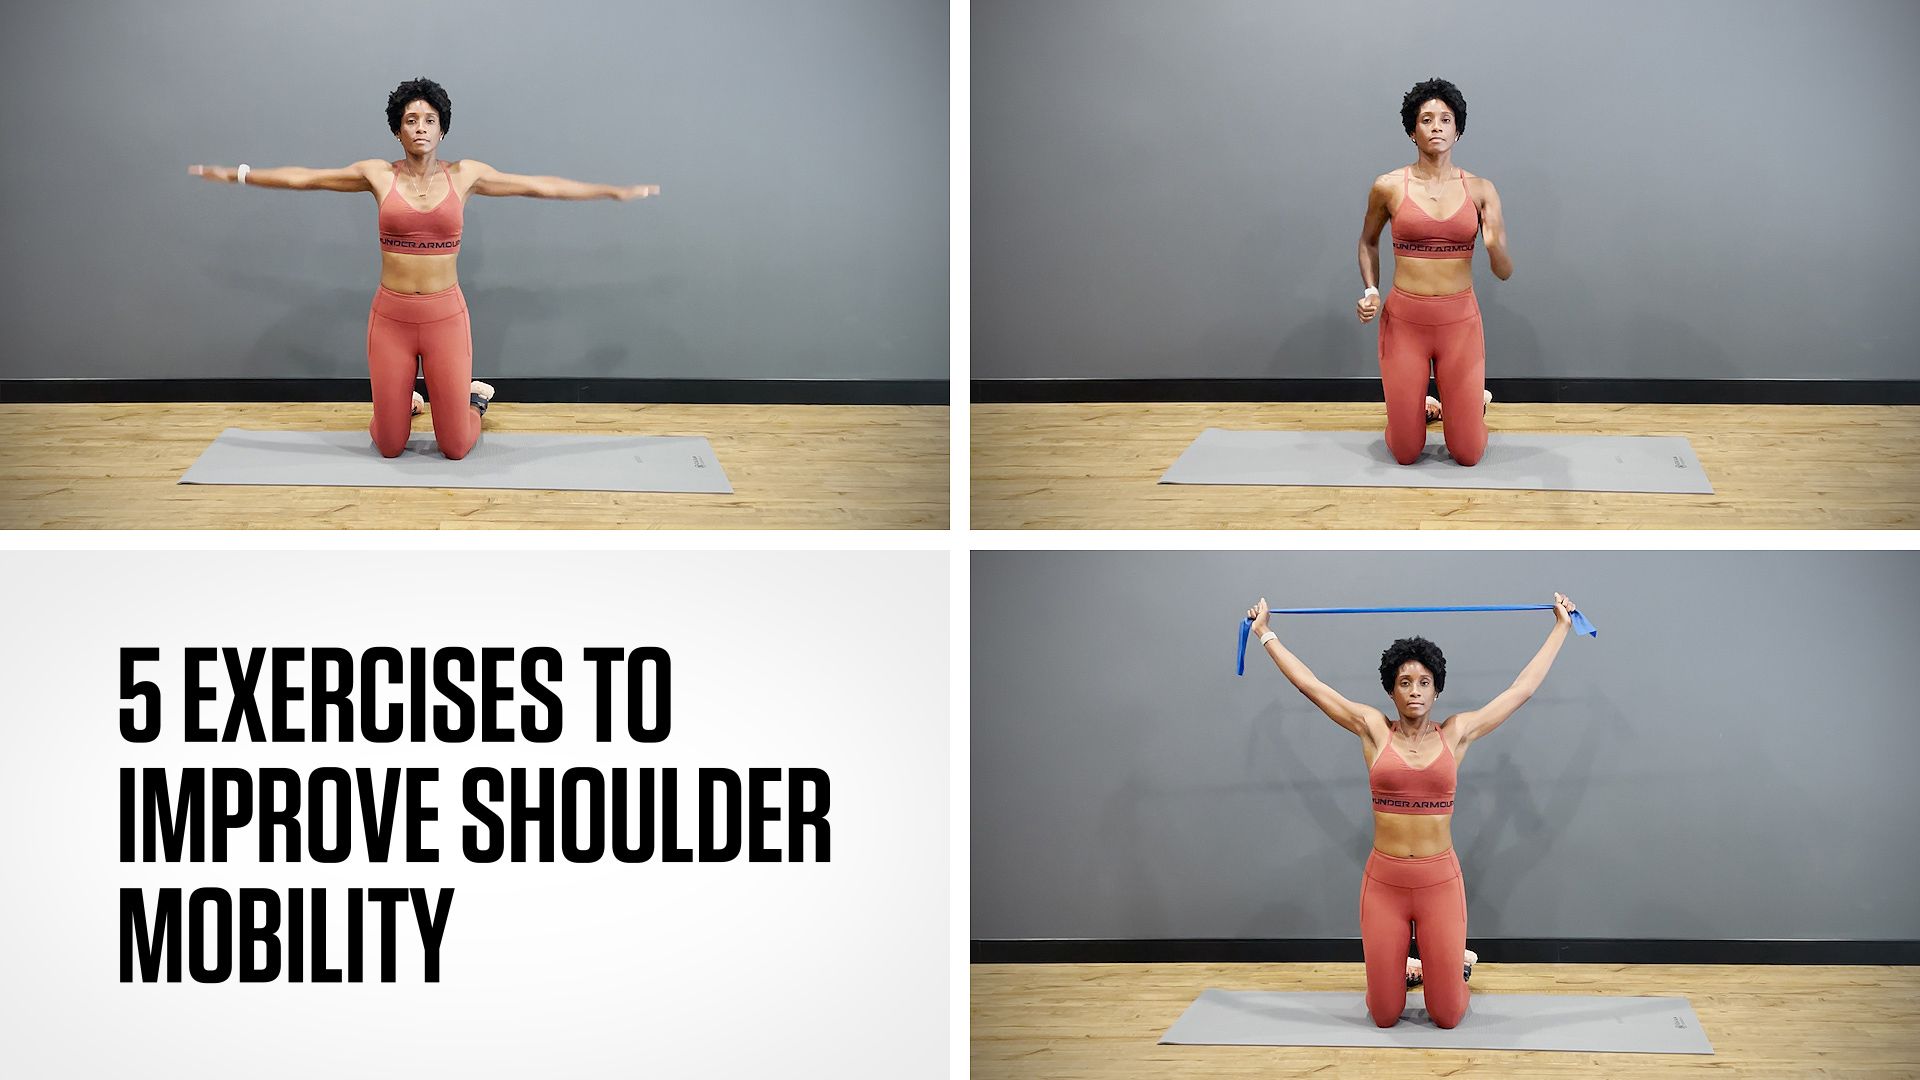 Mobility Exercises to Up Your Fitness